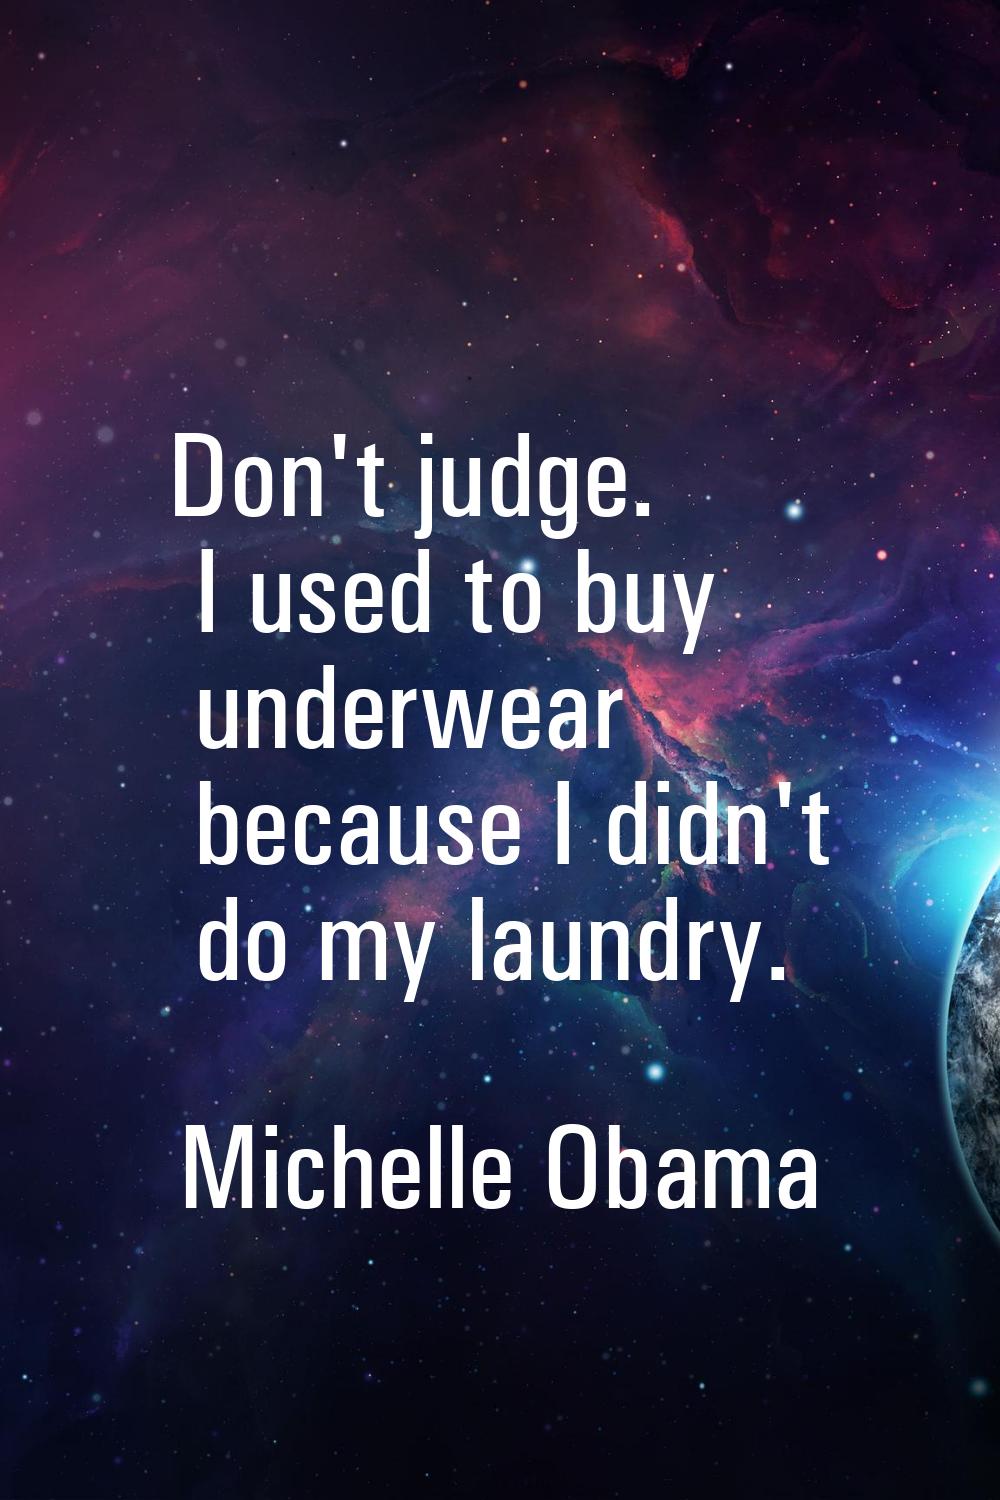 Don't judge. I used to buy underwear because I didn't do my laundry.